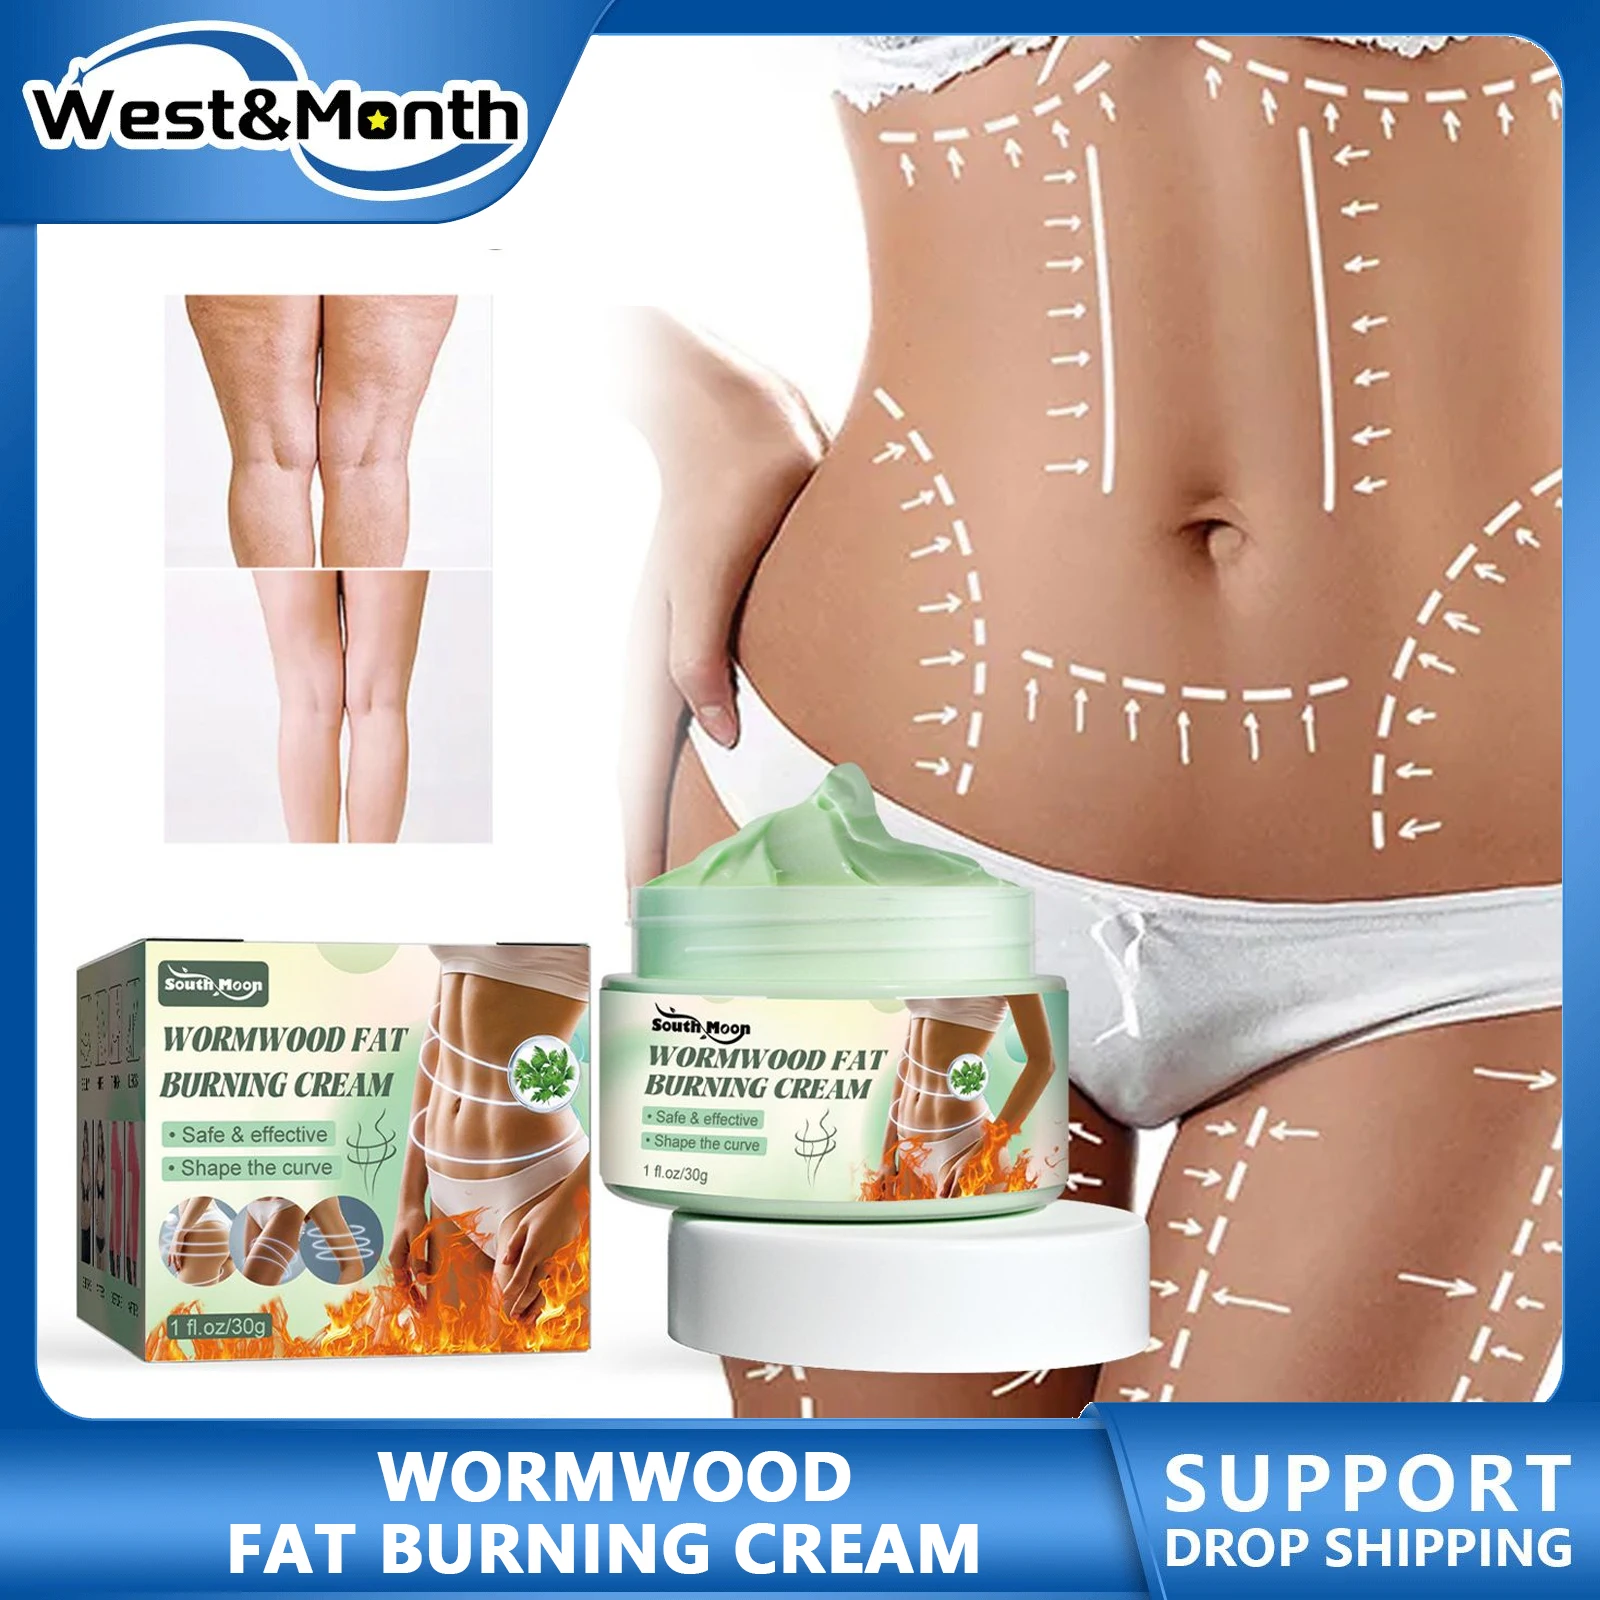 

Wormwood Fat Burning Cream Body Sculpting Weight Loss Anti-cellulite Slimming Shaping Firming Body Skin Nourishing Massage Care